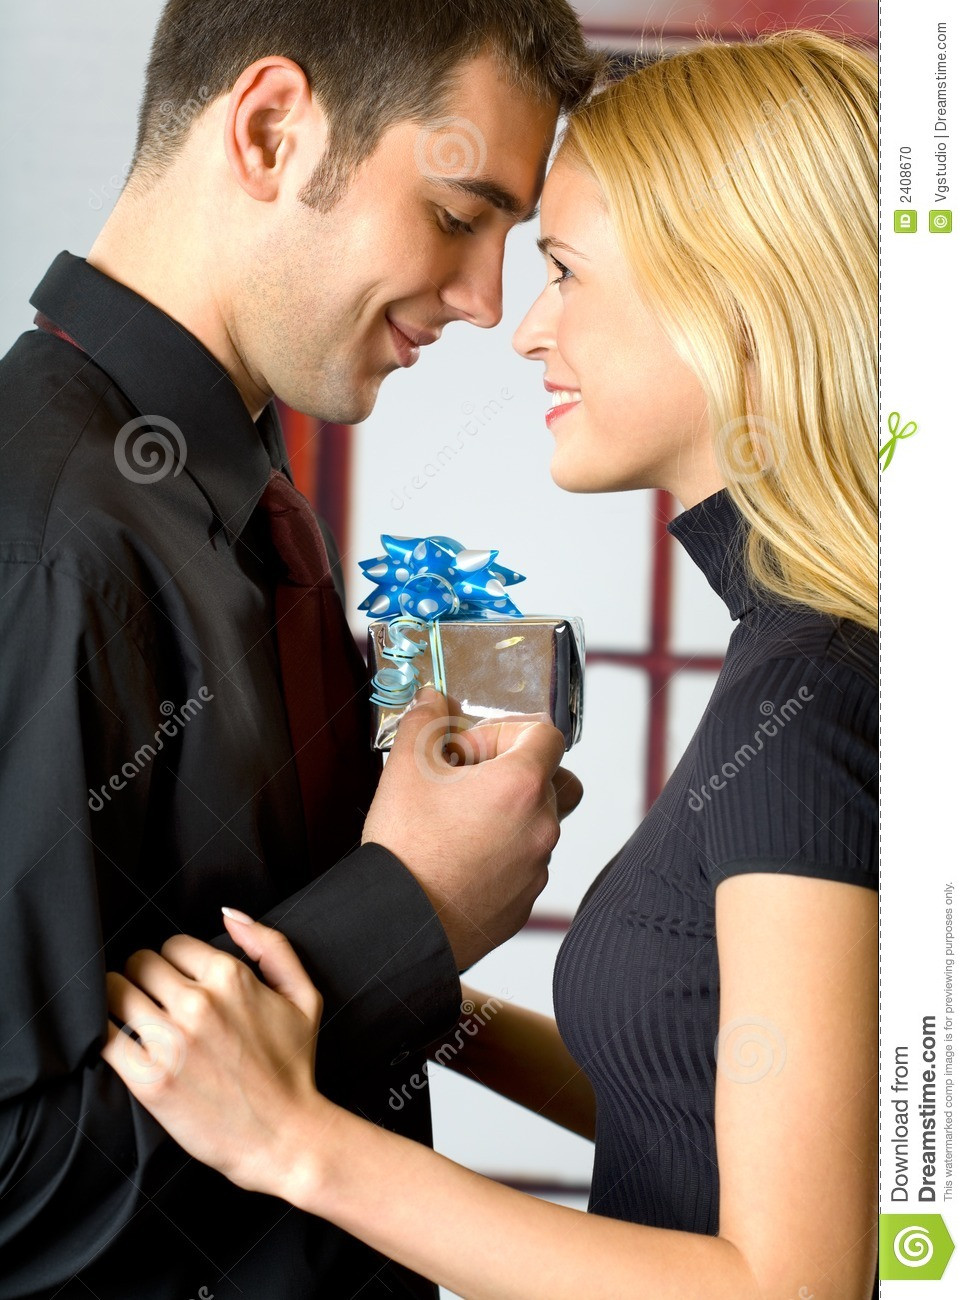 Gift Ideas For Young Couple
 Young Couple With Gifts Stock Image